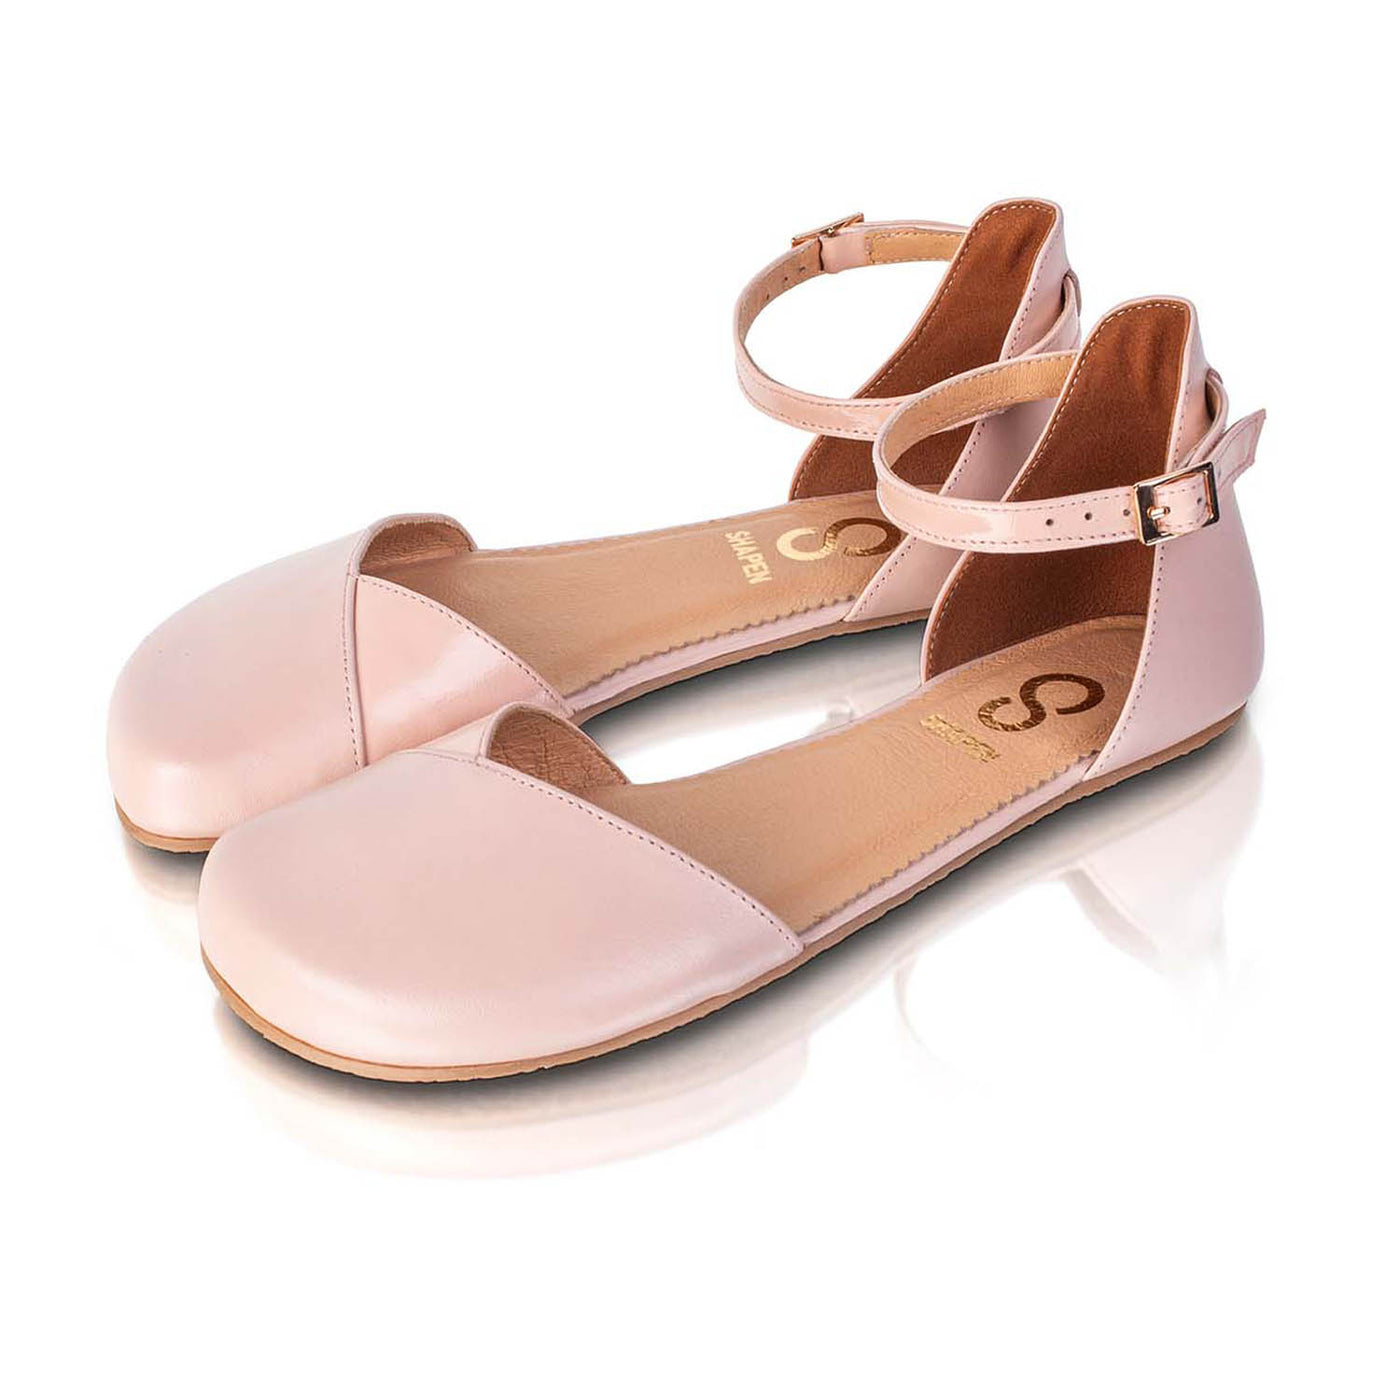 A photo of Shapen Poppy D’orsay dressy flats with a leather upper and rubber soles. The flats are a rose beige color with a heel cup and dainty ankle strap, the inside of the sole are a beige color. Both flats are shown beside each other turned with the right shoe towards the front against a white background. #color_rose